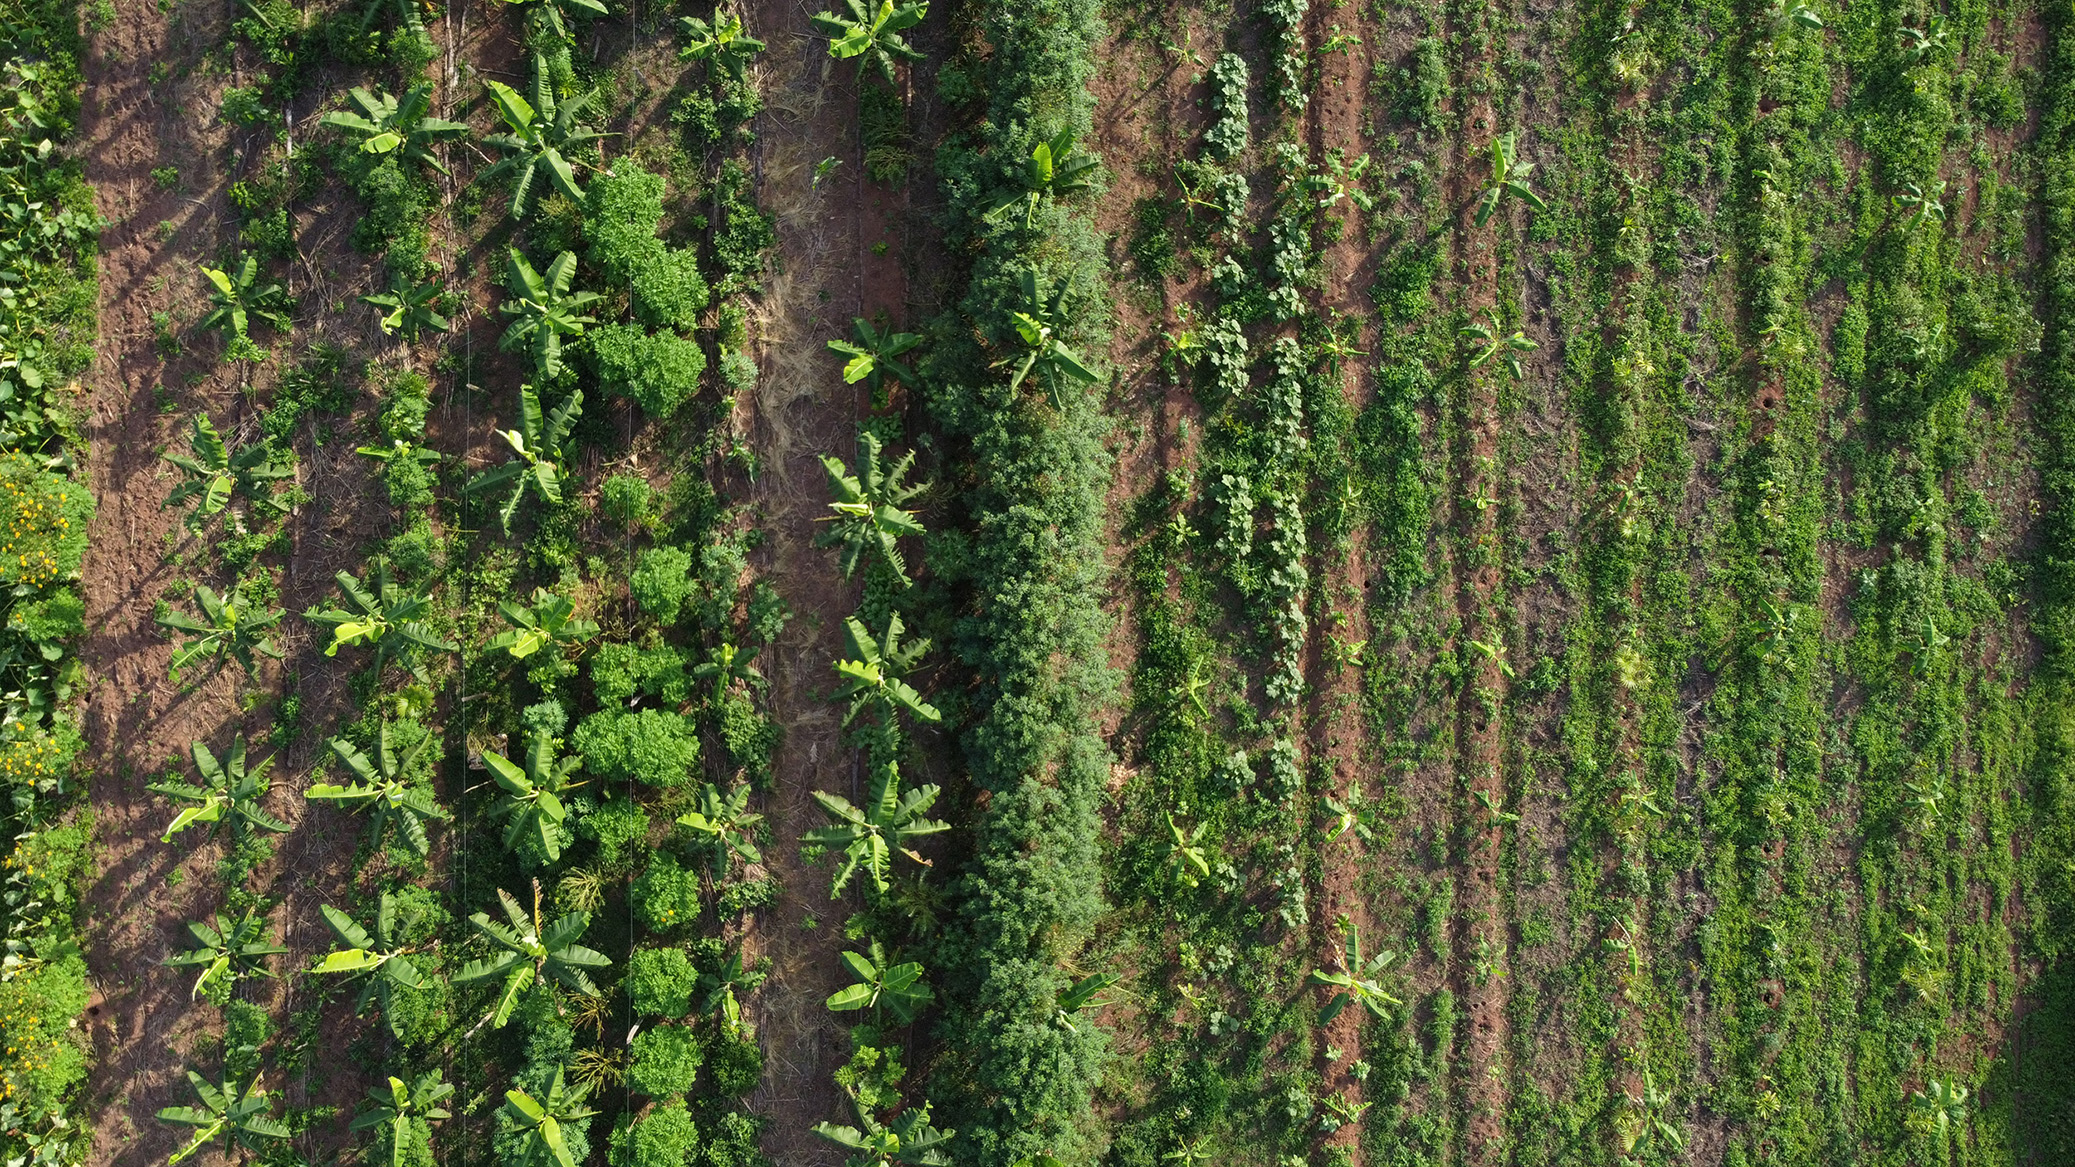 Aerial view looking straight down on rows of plants in an agricultural field.